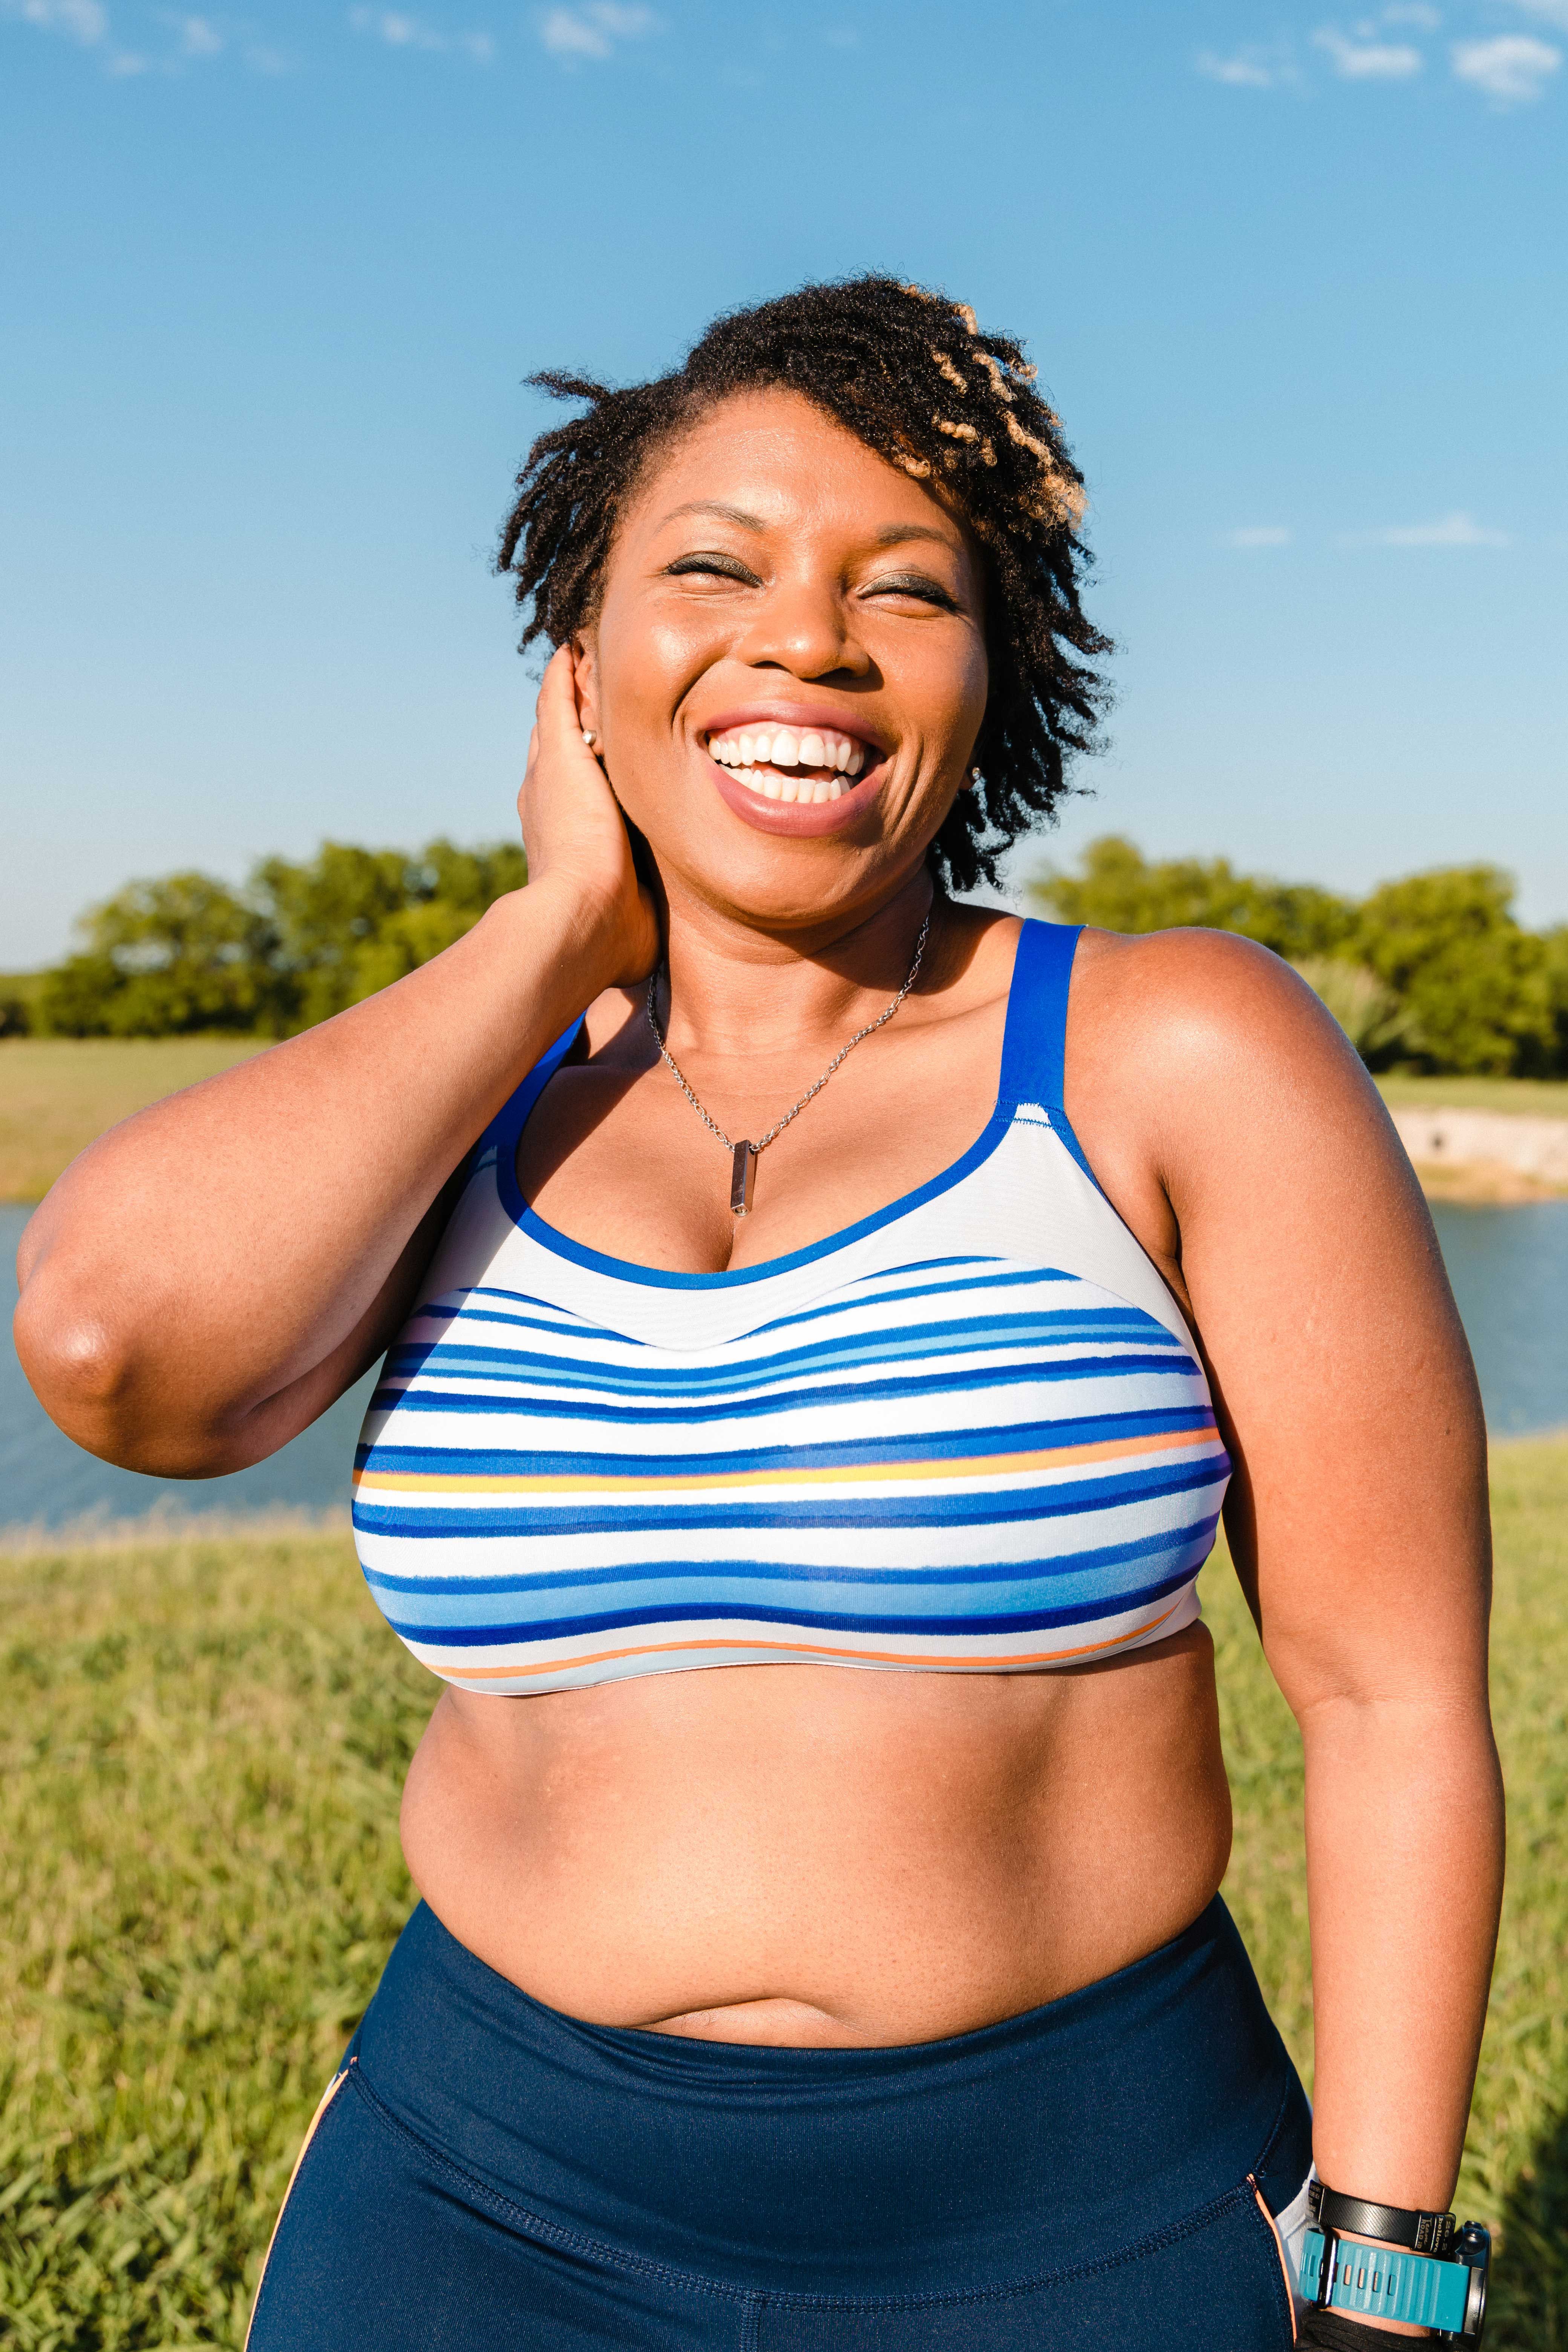 Women Share Their Experiences Being Plus-Sized In A Running World